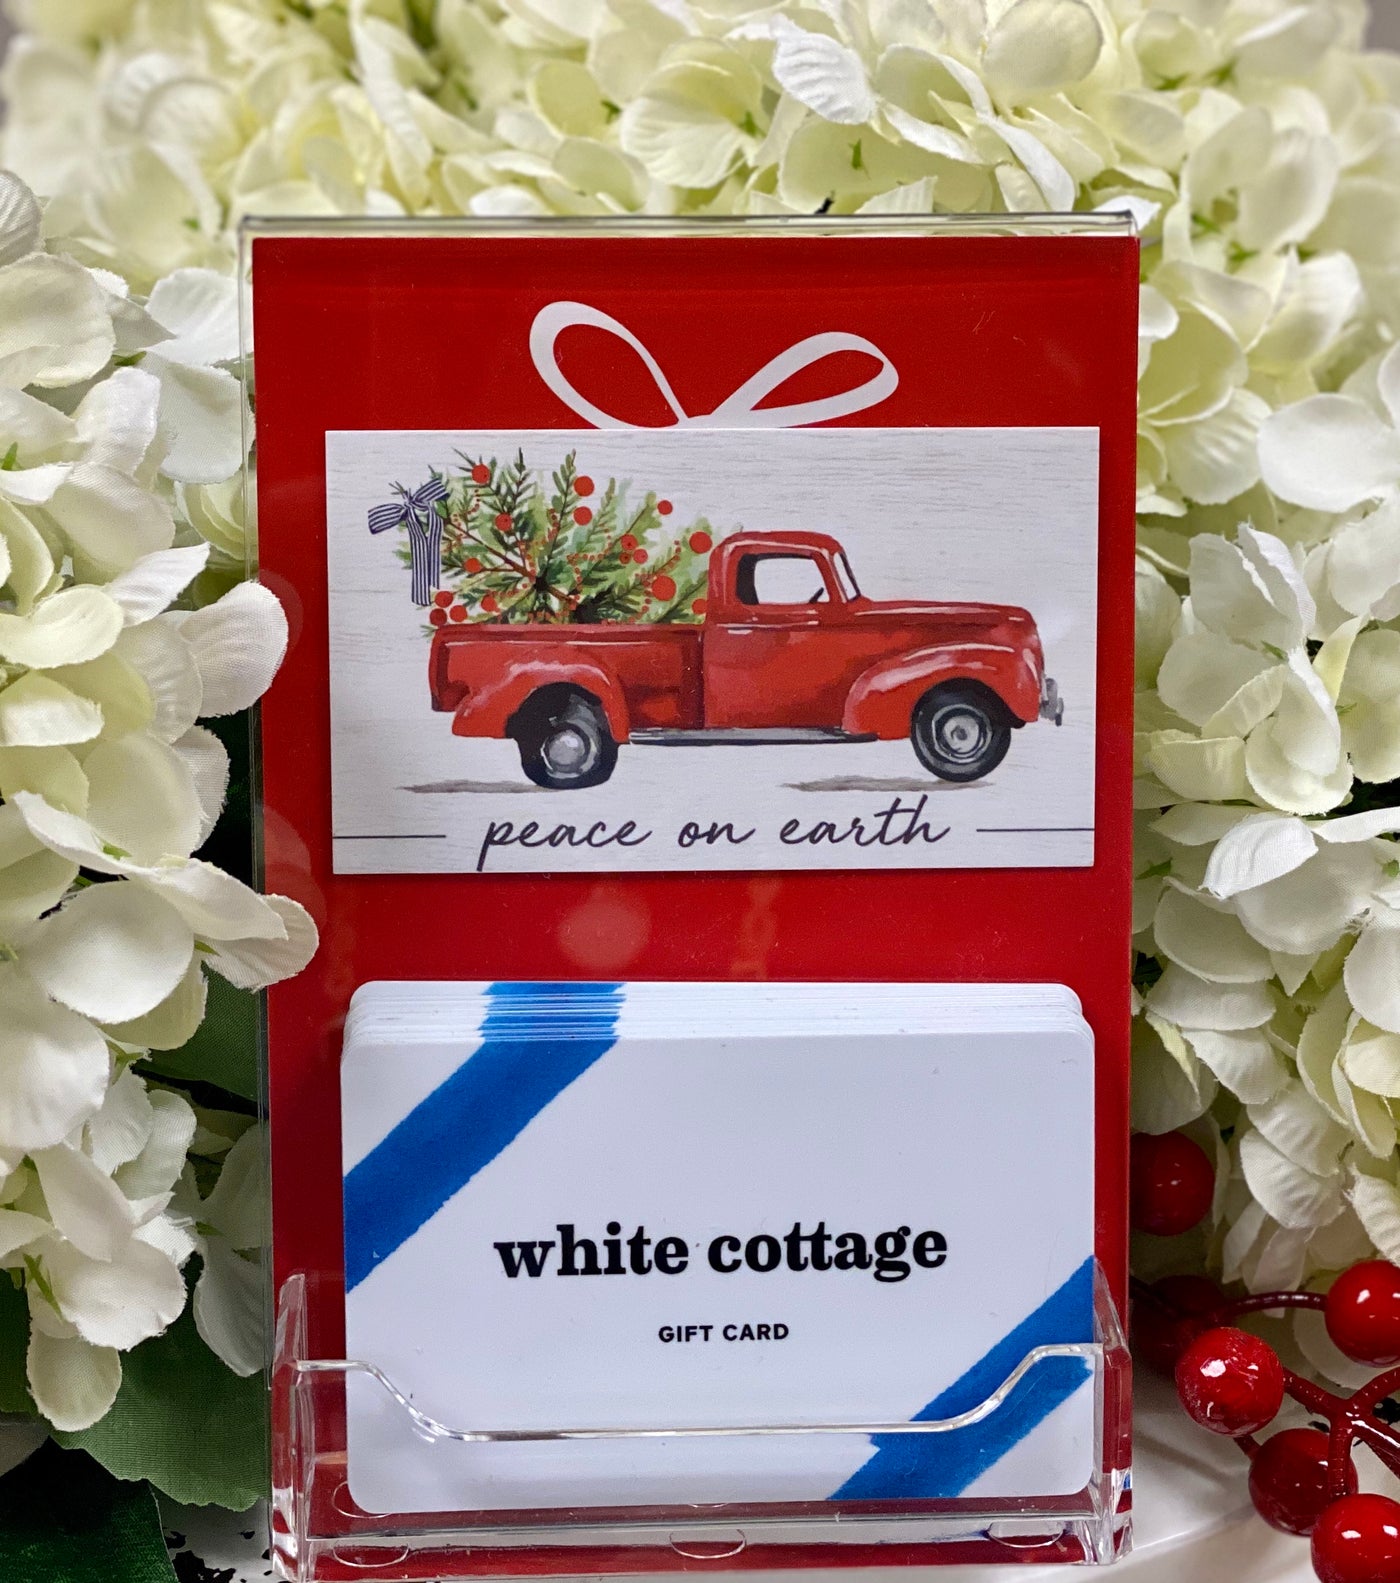 White Cottage Gift Card - Store Card - plastic